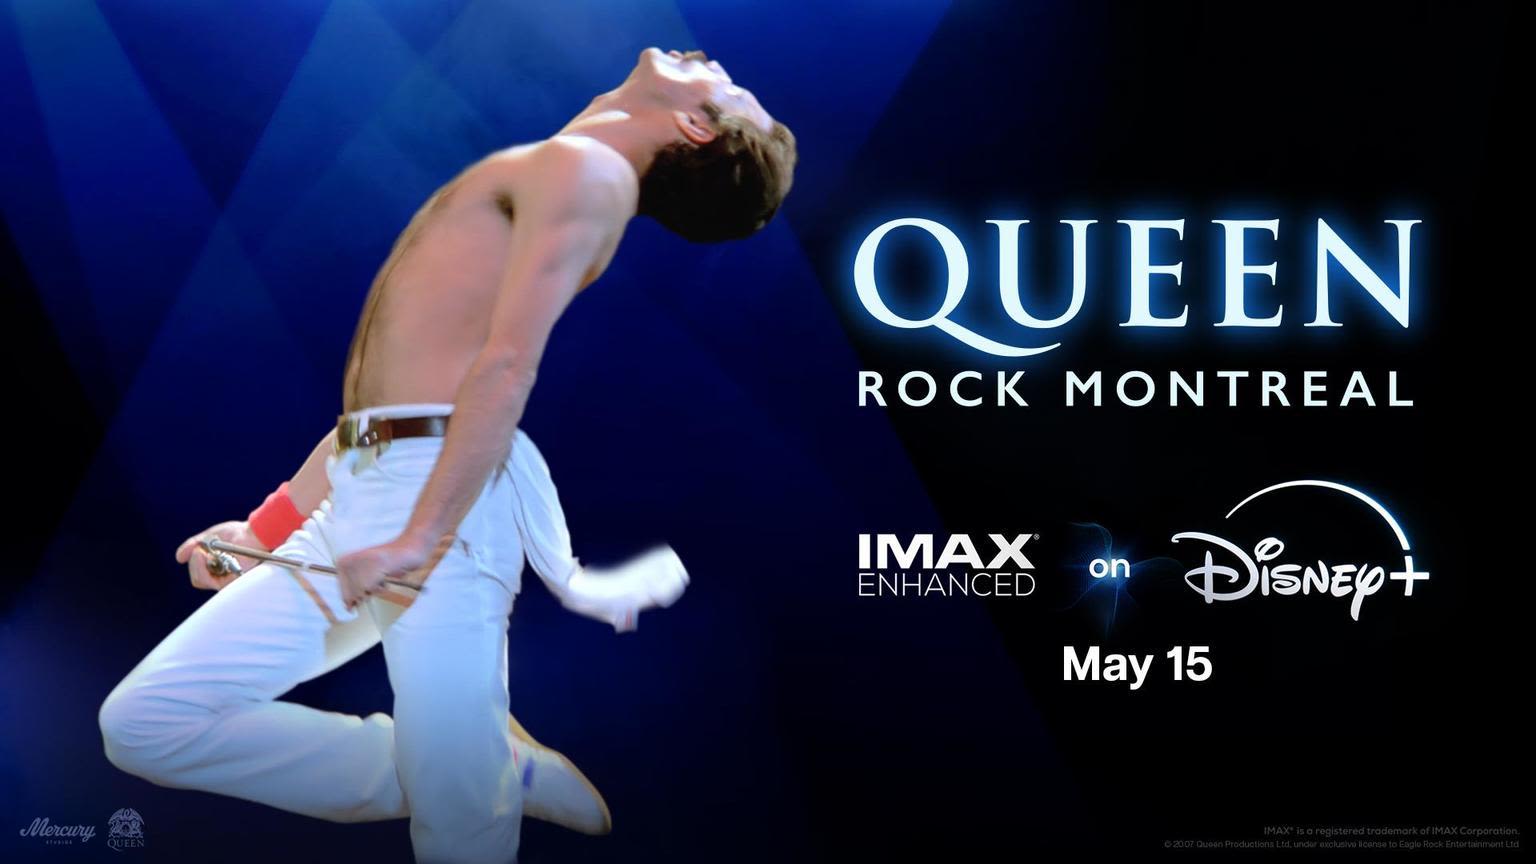 Disney+ Debuts First Concert Film to Stream with IMAX Enhanced Sound